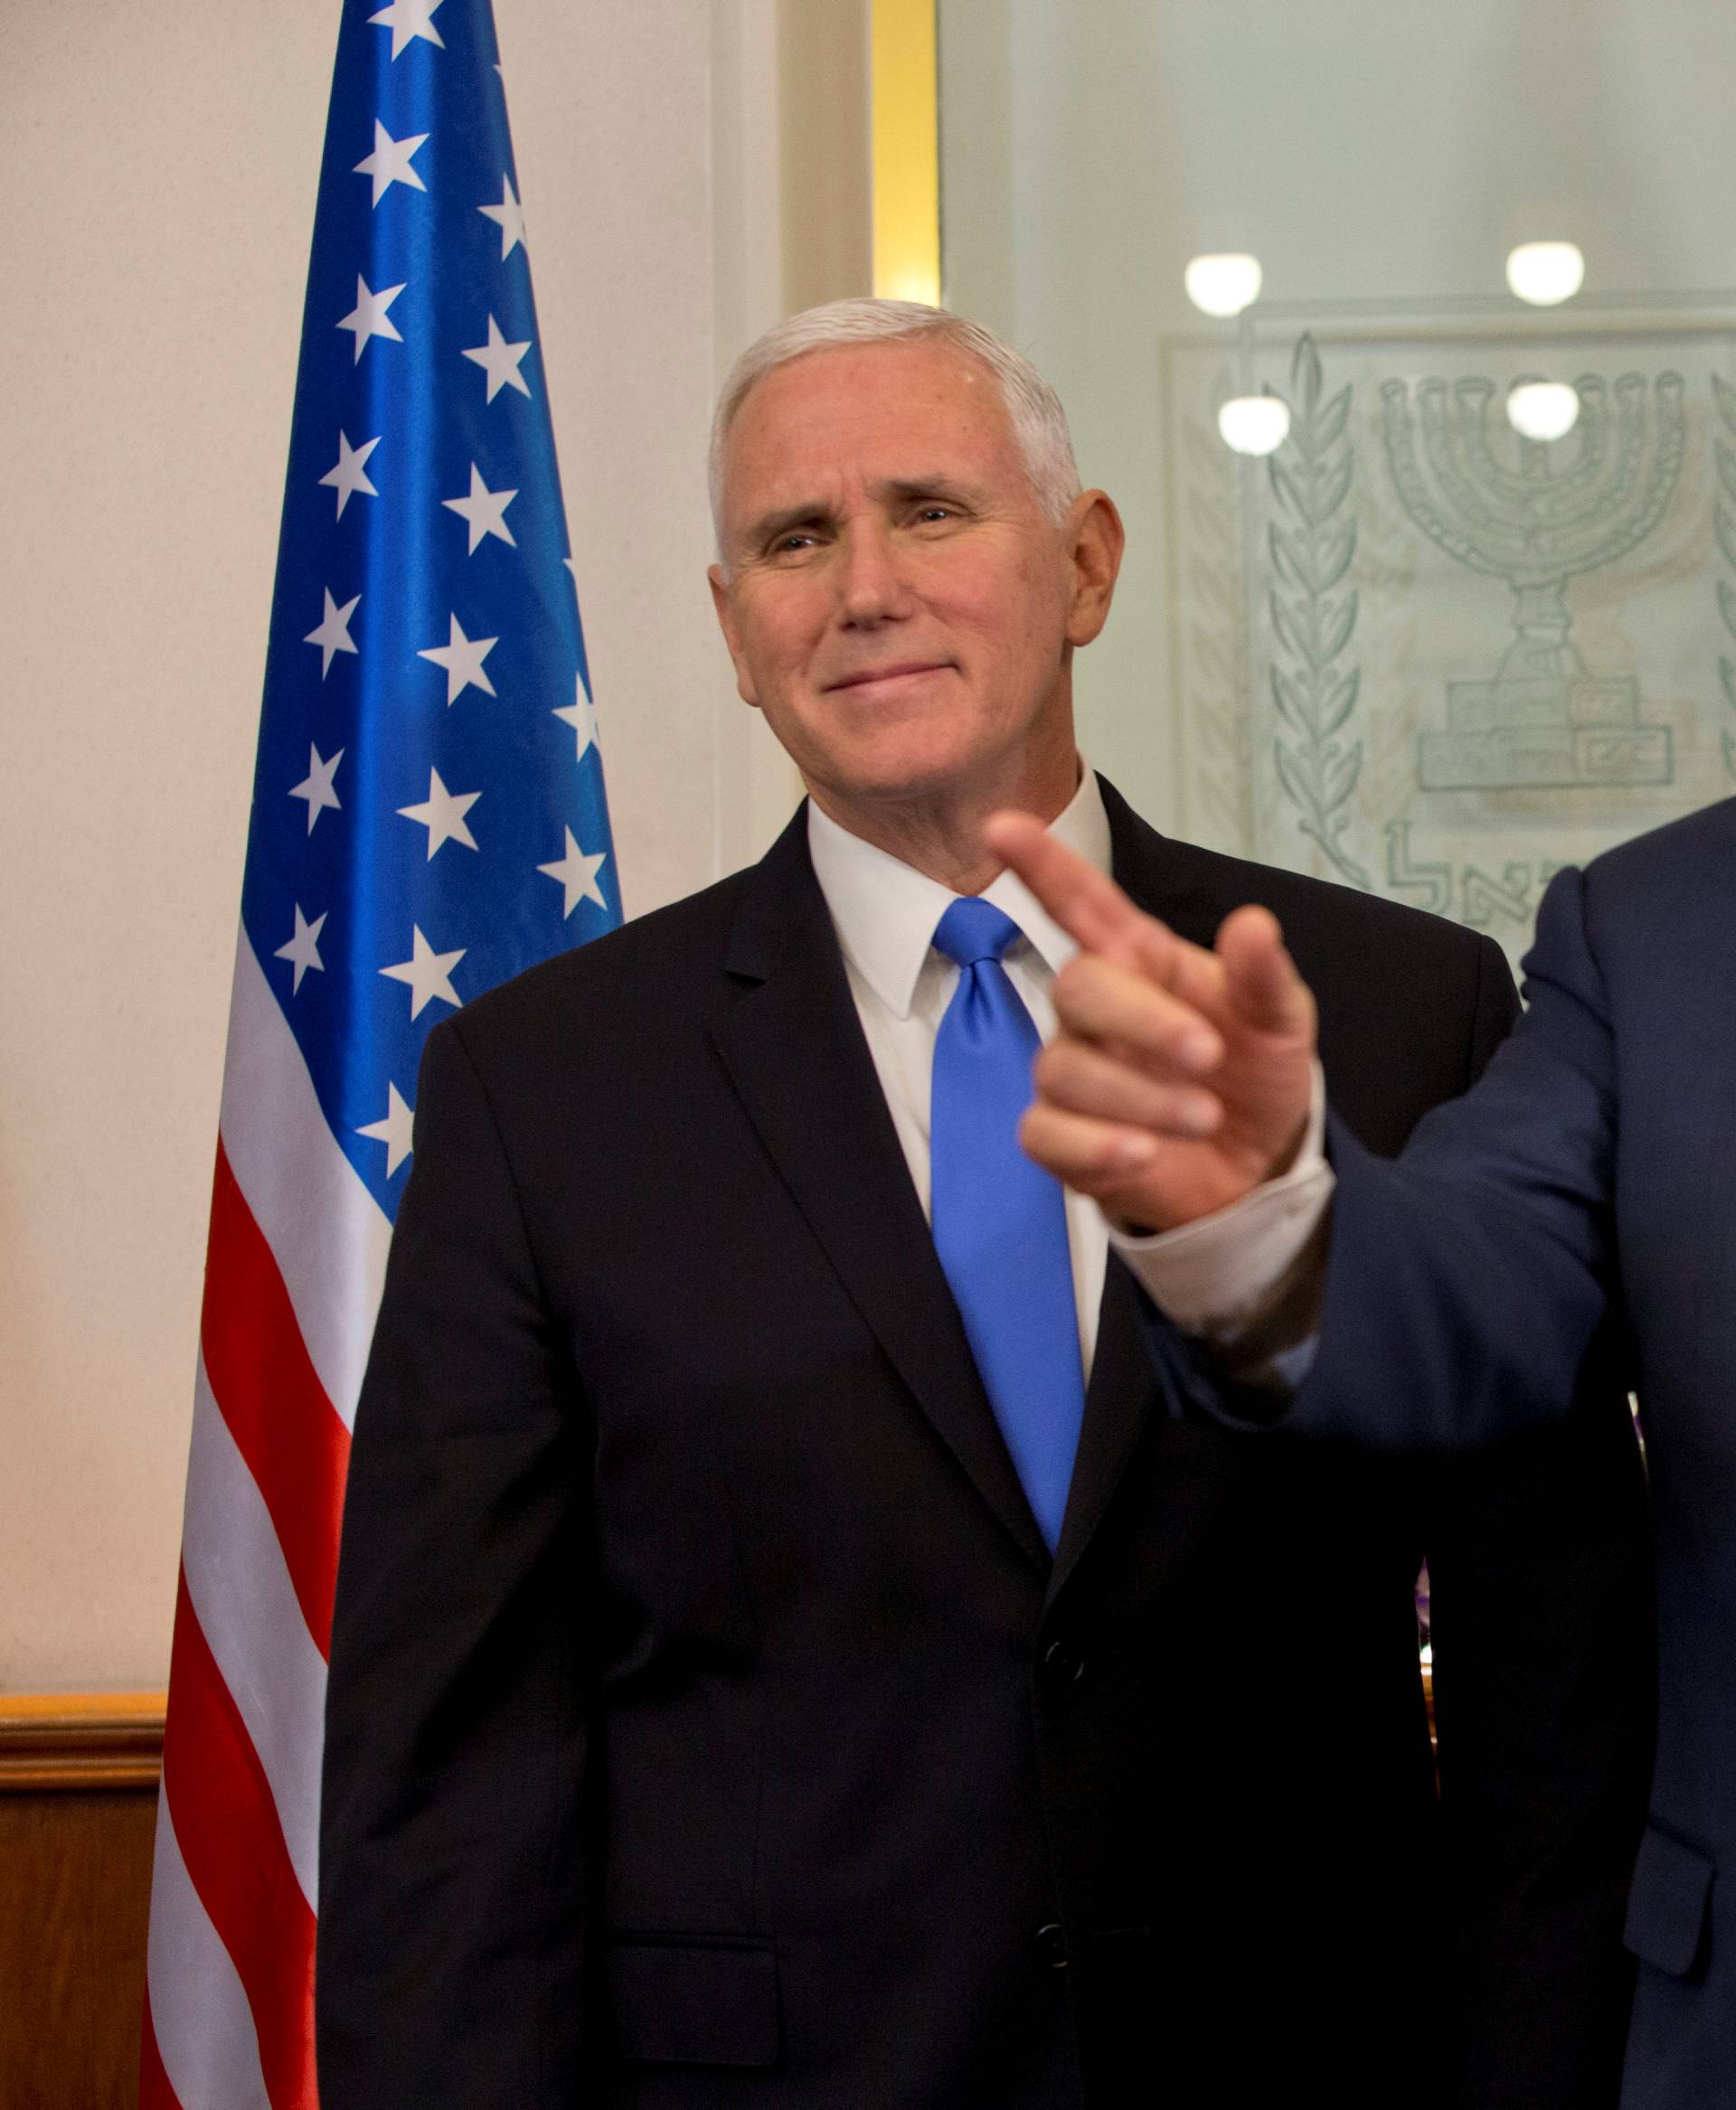 U.S. Vice President Mike Pence stands next to Israeli Prime Minister Benjamin Netanyahu during a meeting at the Prime Minister's office in Jerusalem